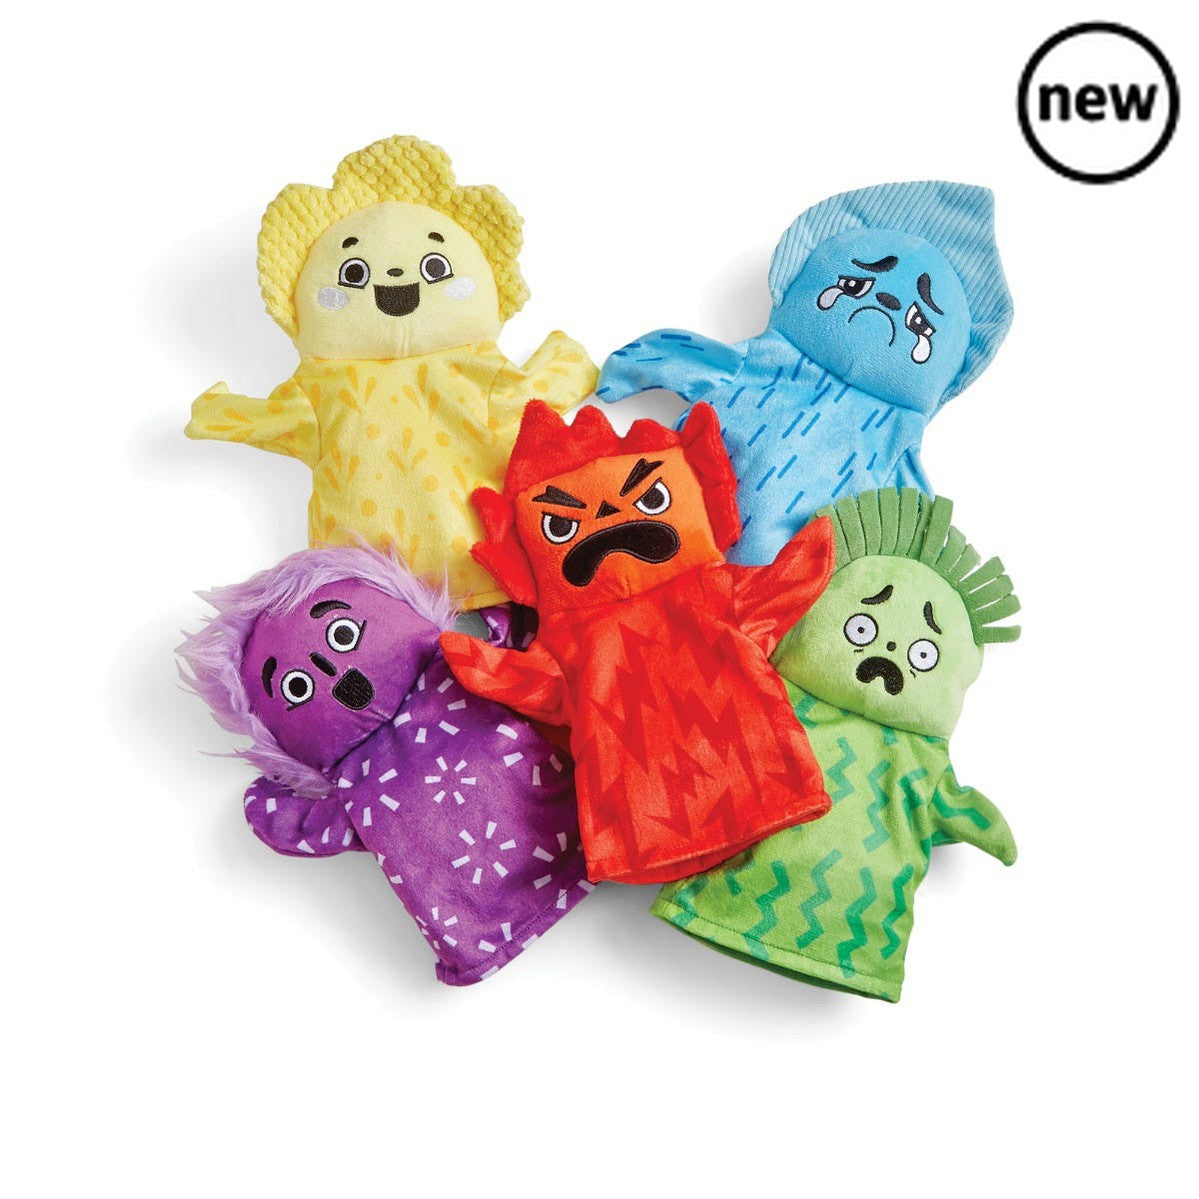 Feelings Family Hand Puppets, Whether happy, sad, surprised, angry or scared, these 5 colourful Feelings Family Hand Puppets for kids help young children explore feelings and emotions through guided or free-play, or storytelling activities. Perfectly sized to fit a child’s hands and most adult’s, they are uniquely designed with tactile elements to help children engage with their feelings, and made from soft, durable materials. The hair on the happy, angry and sad puppets makes a crinkly sound, which adds an